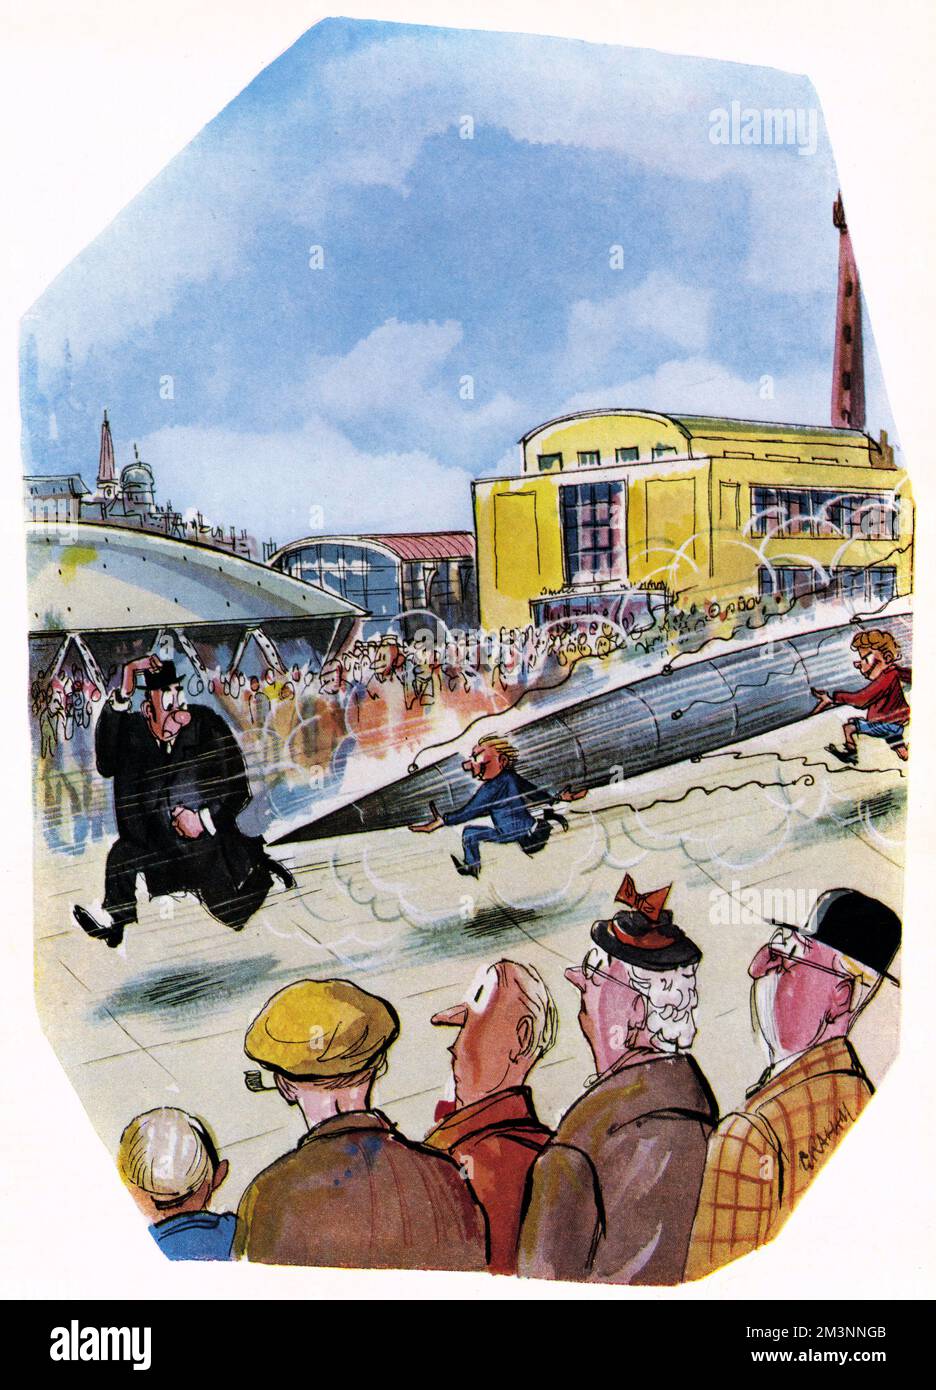 Cartoon by Graham featuring his butler character Briggs (created for The Tatler) being pursued by some mischievous children who seem to have somehow got hold of the tall, pointed Skylon at the Festival of Britain.     Date: 1951 Stock Photo